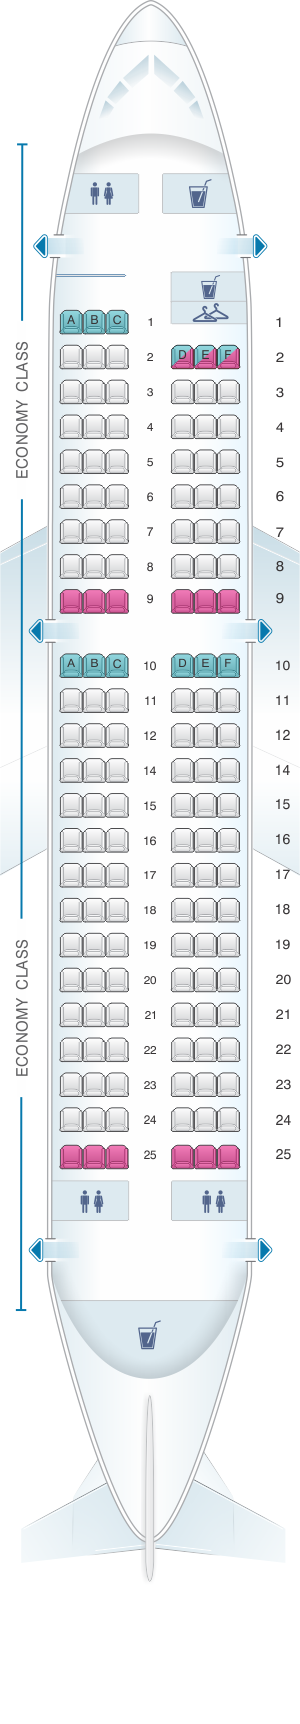 Seat map for Iberia Airbus A319 single-class